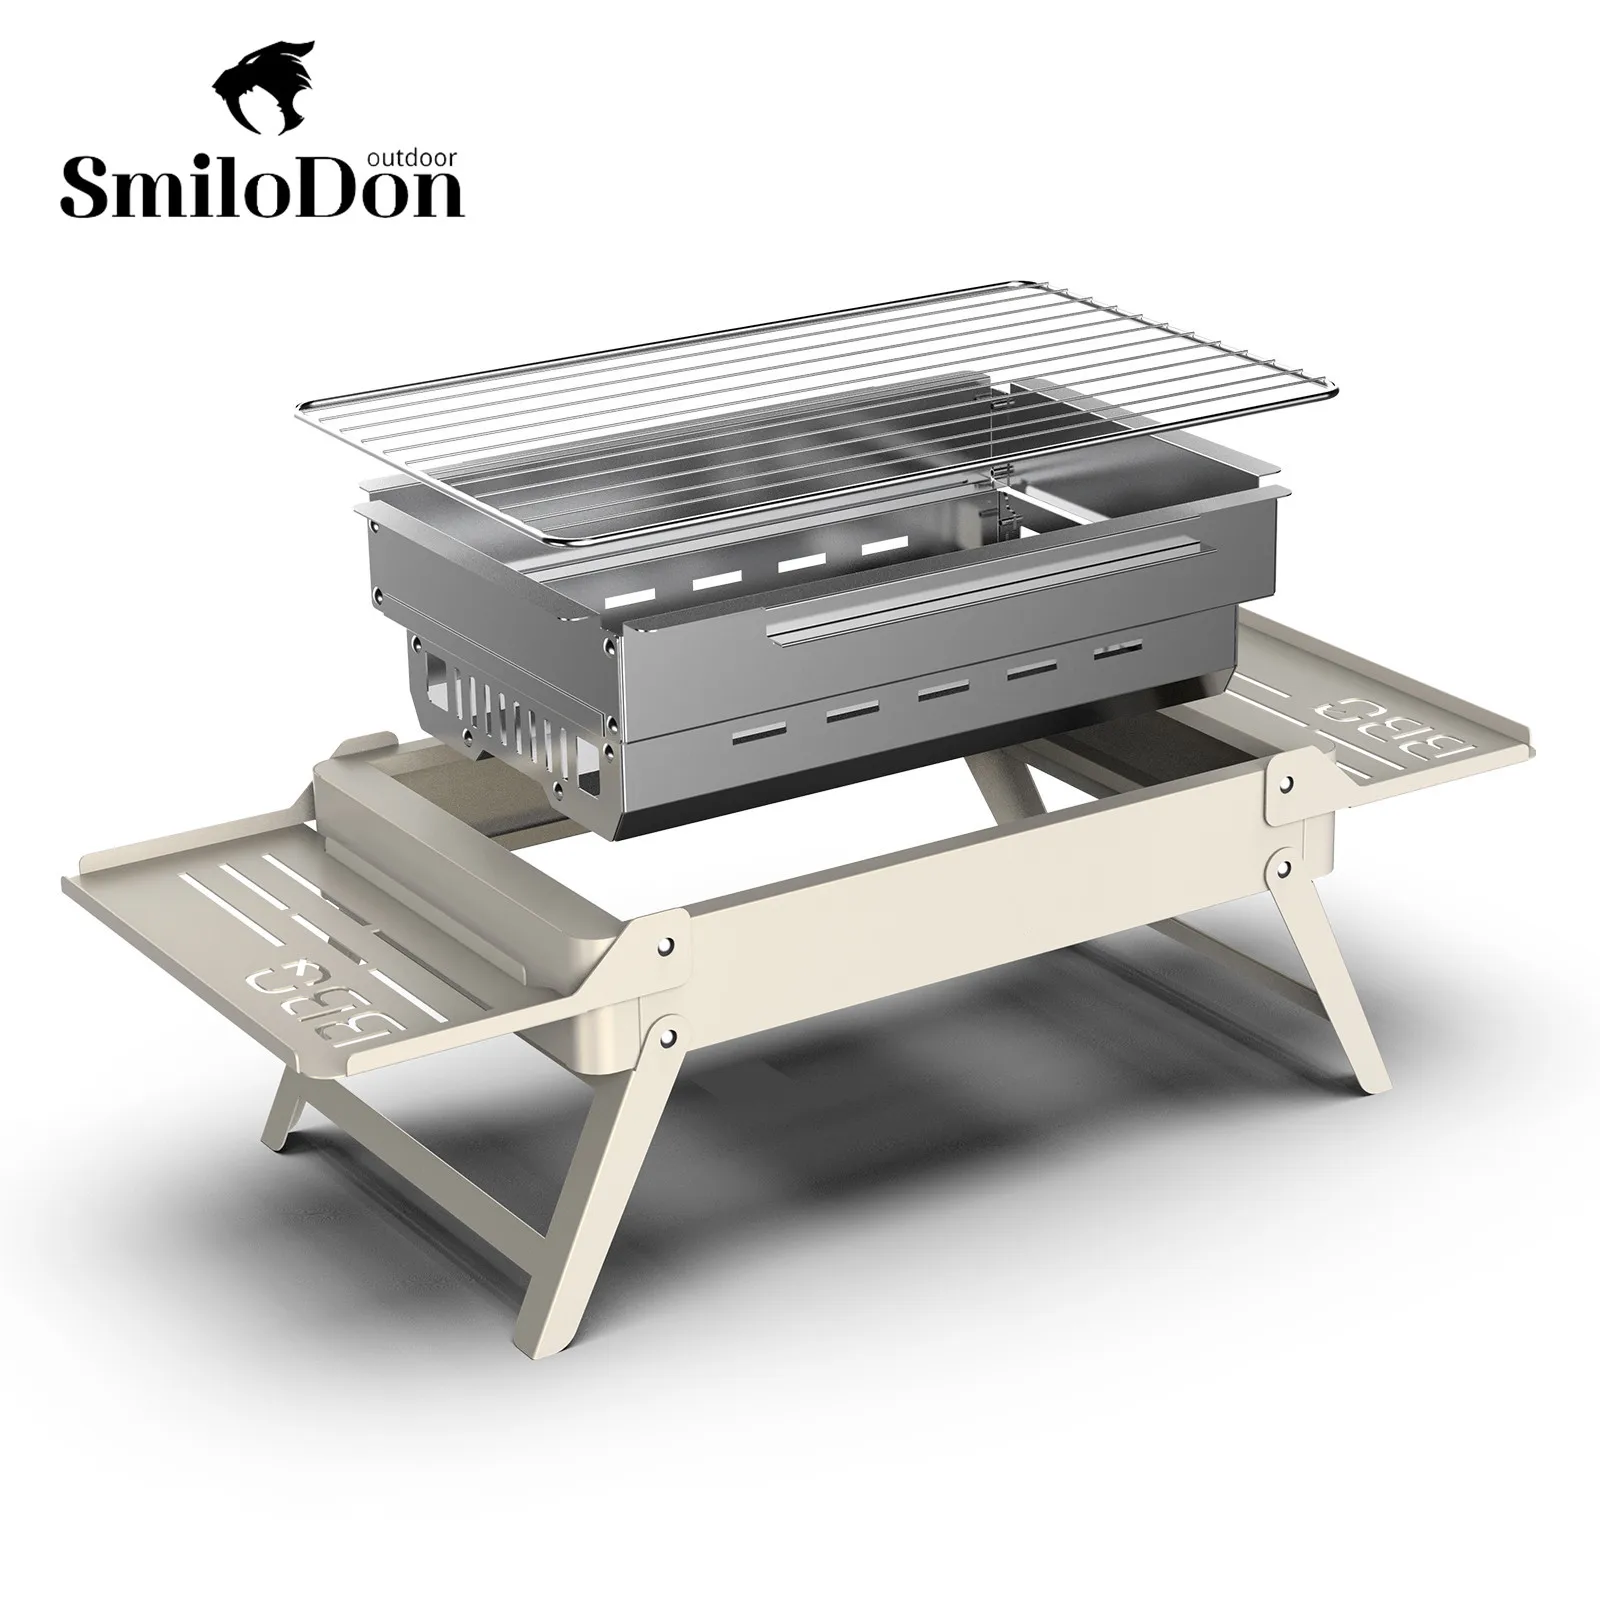 

SmiloDon Outdoor Mini BBQ Grills Portable Barbecue Charcoal Stove For Camping Picnic Ultralight Folding BBQ Grill Accessories